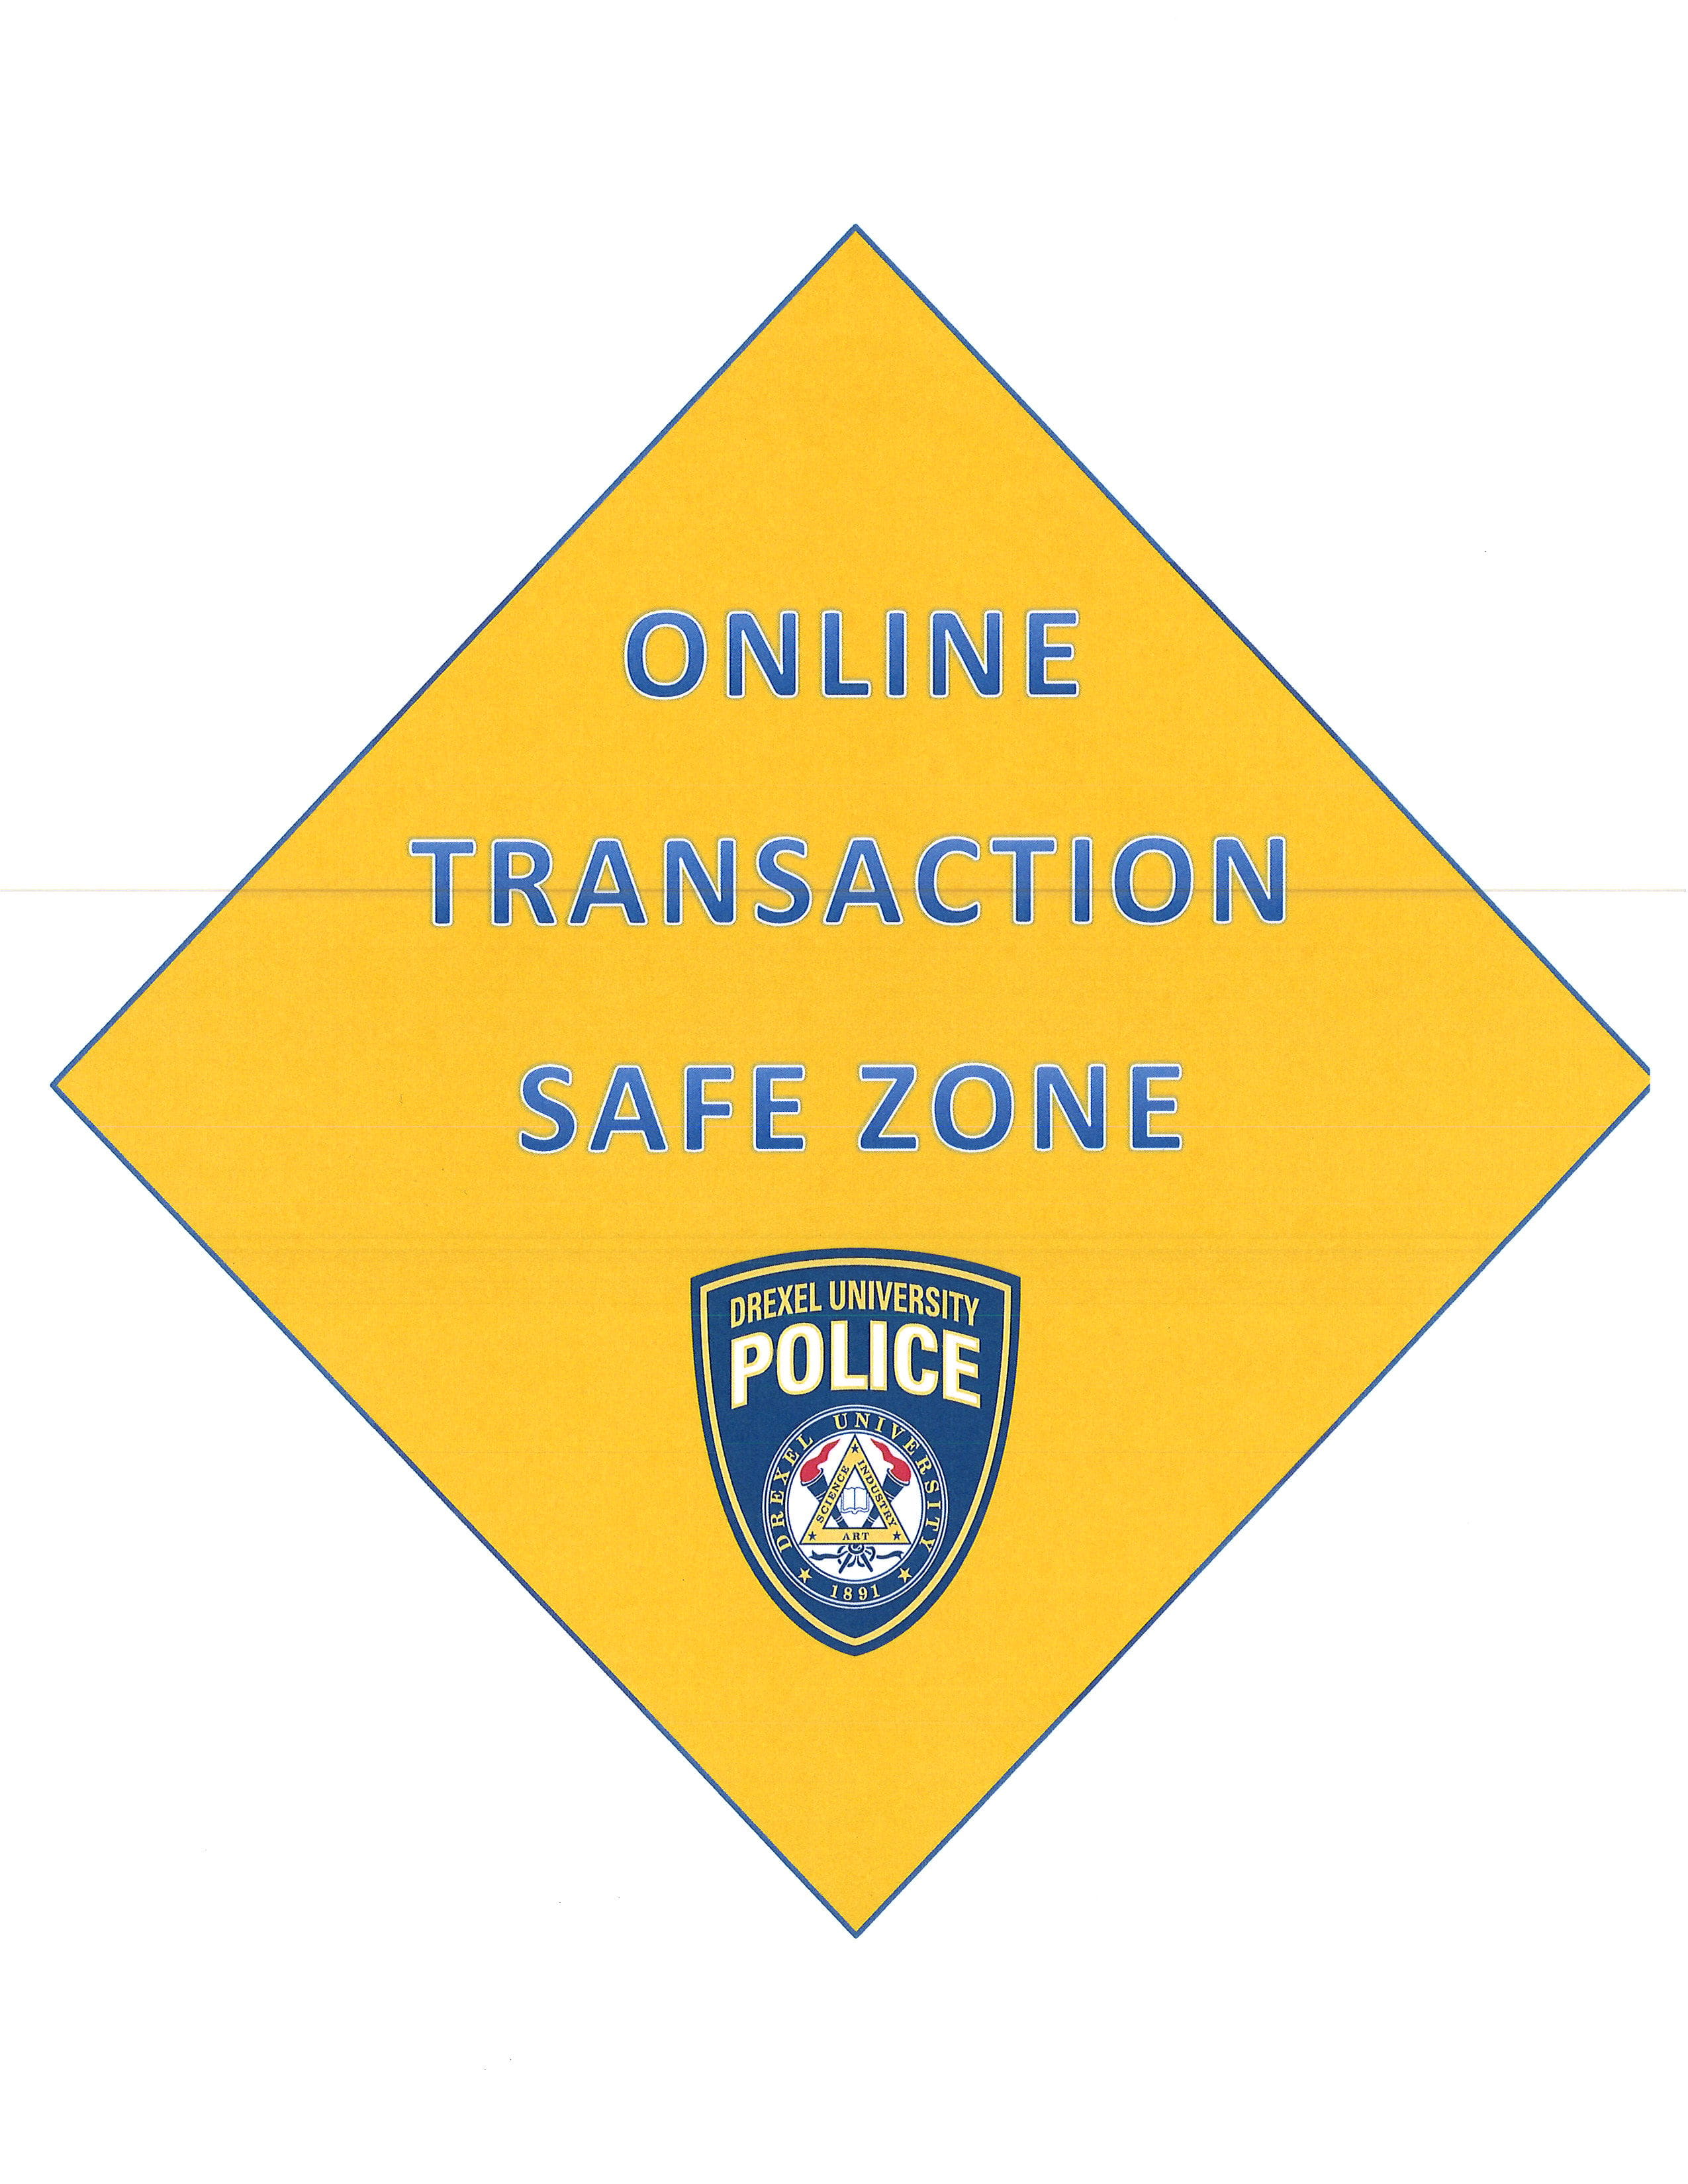 Yellow diamond with Drexel Police Department logo and "Online Transaction Safe Zone."